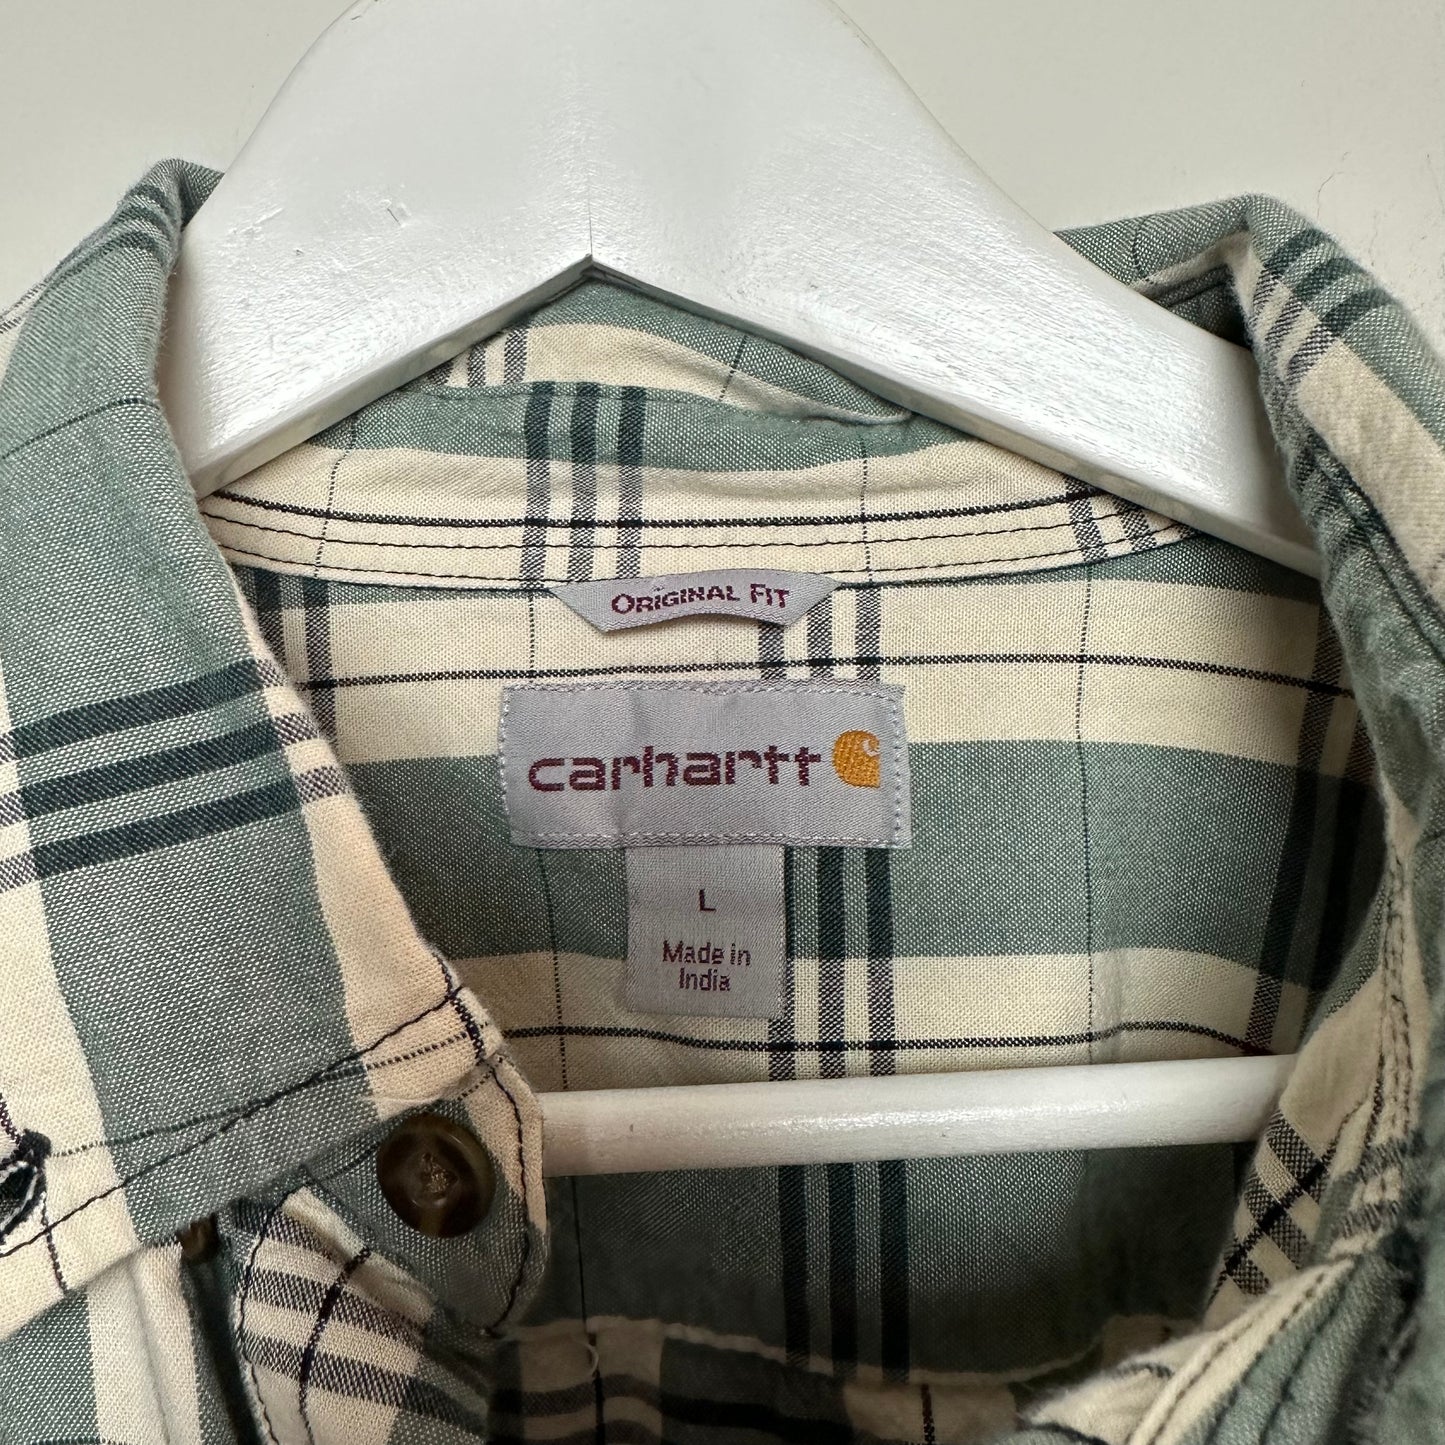 Carhartt Loose Fit Midweight Plaid Short Sleeve Button Down Collared Shirt Large Original Fit